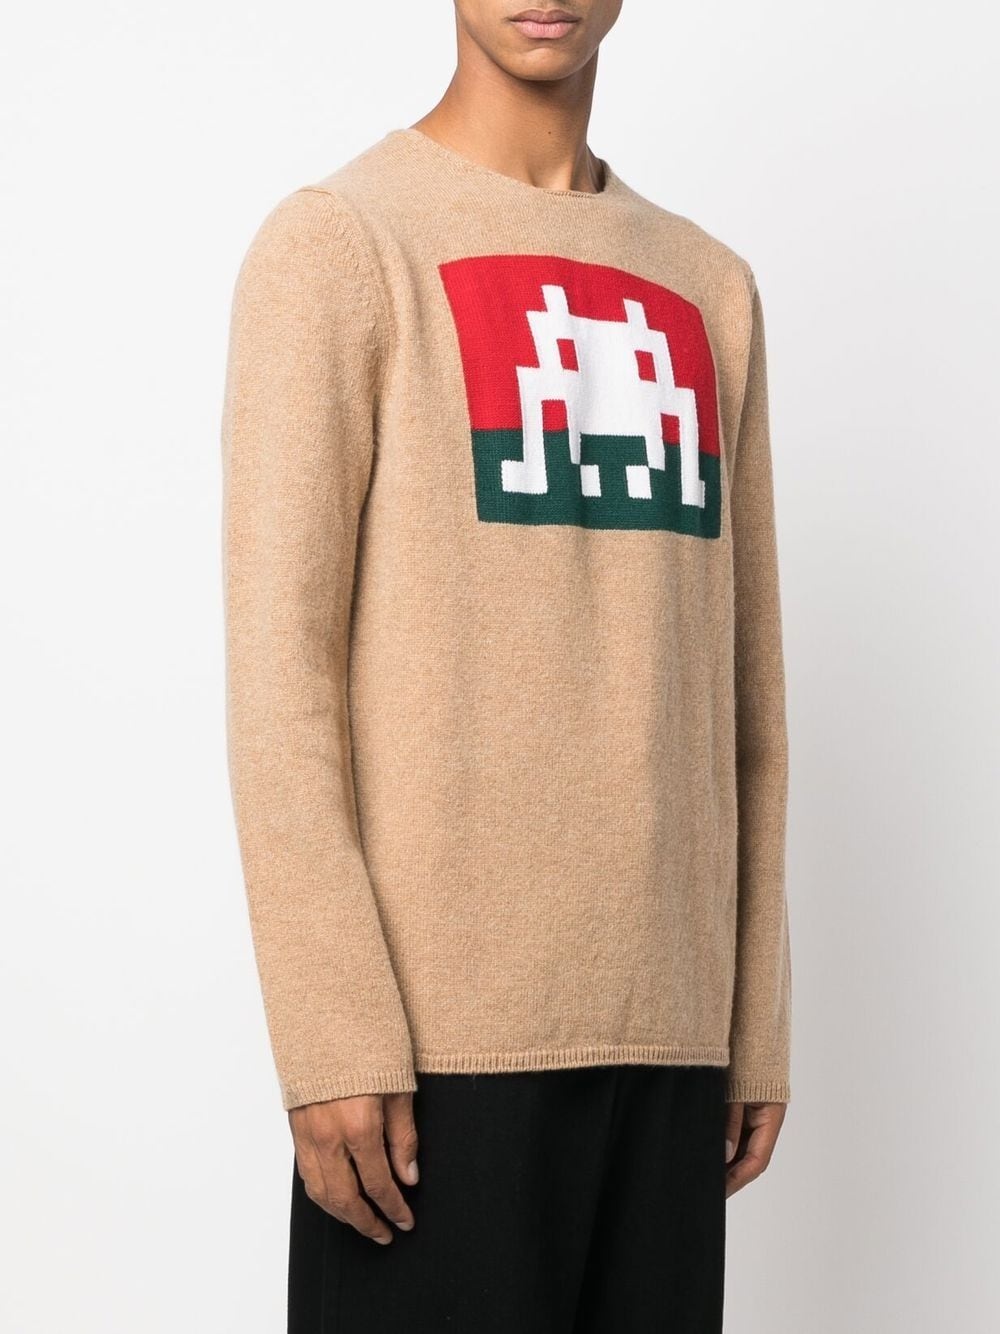 Space Invaders graphic-knit jumper - 3